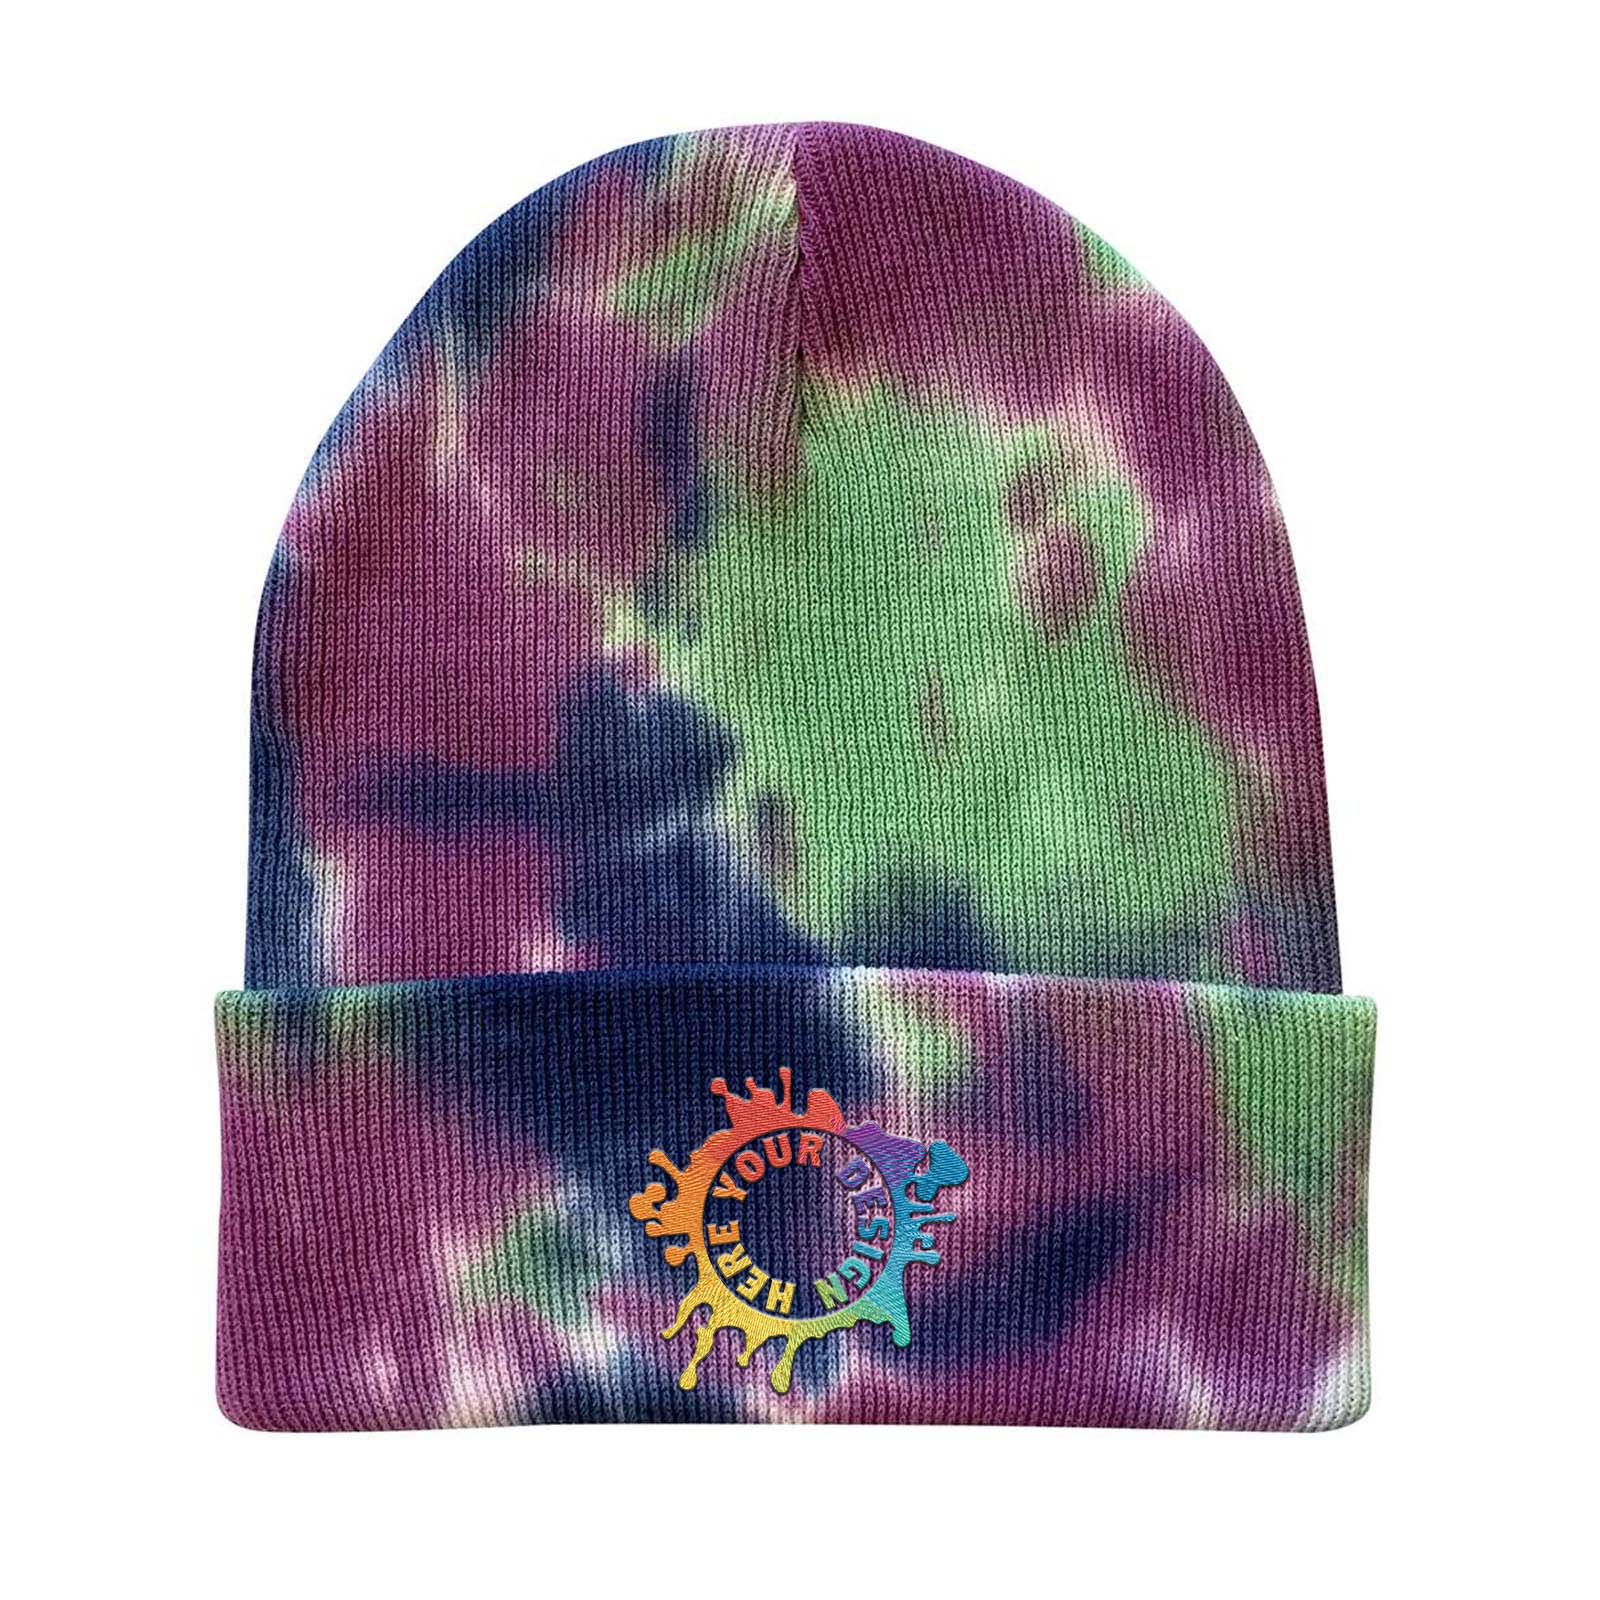 Embroidered Sportsman - 12" Tie-Dyed Knit - Mato & Hash